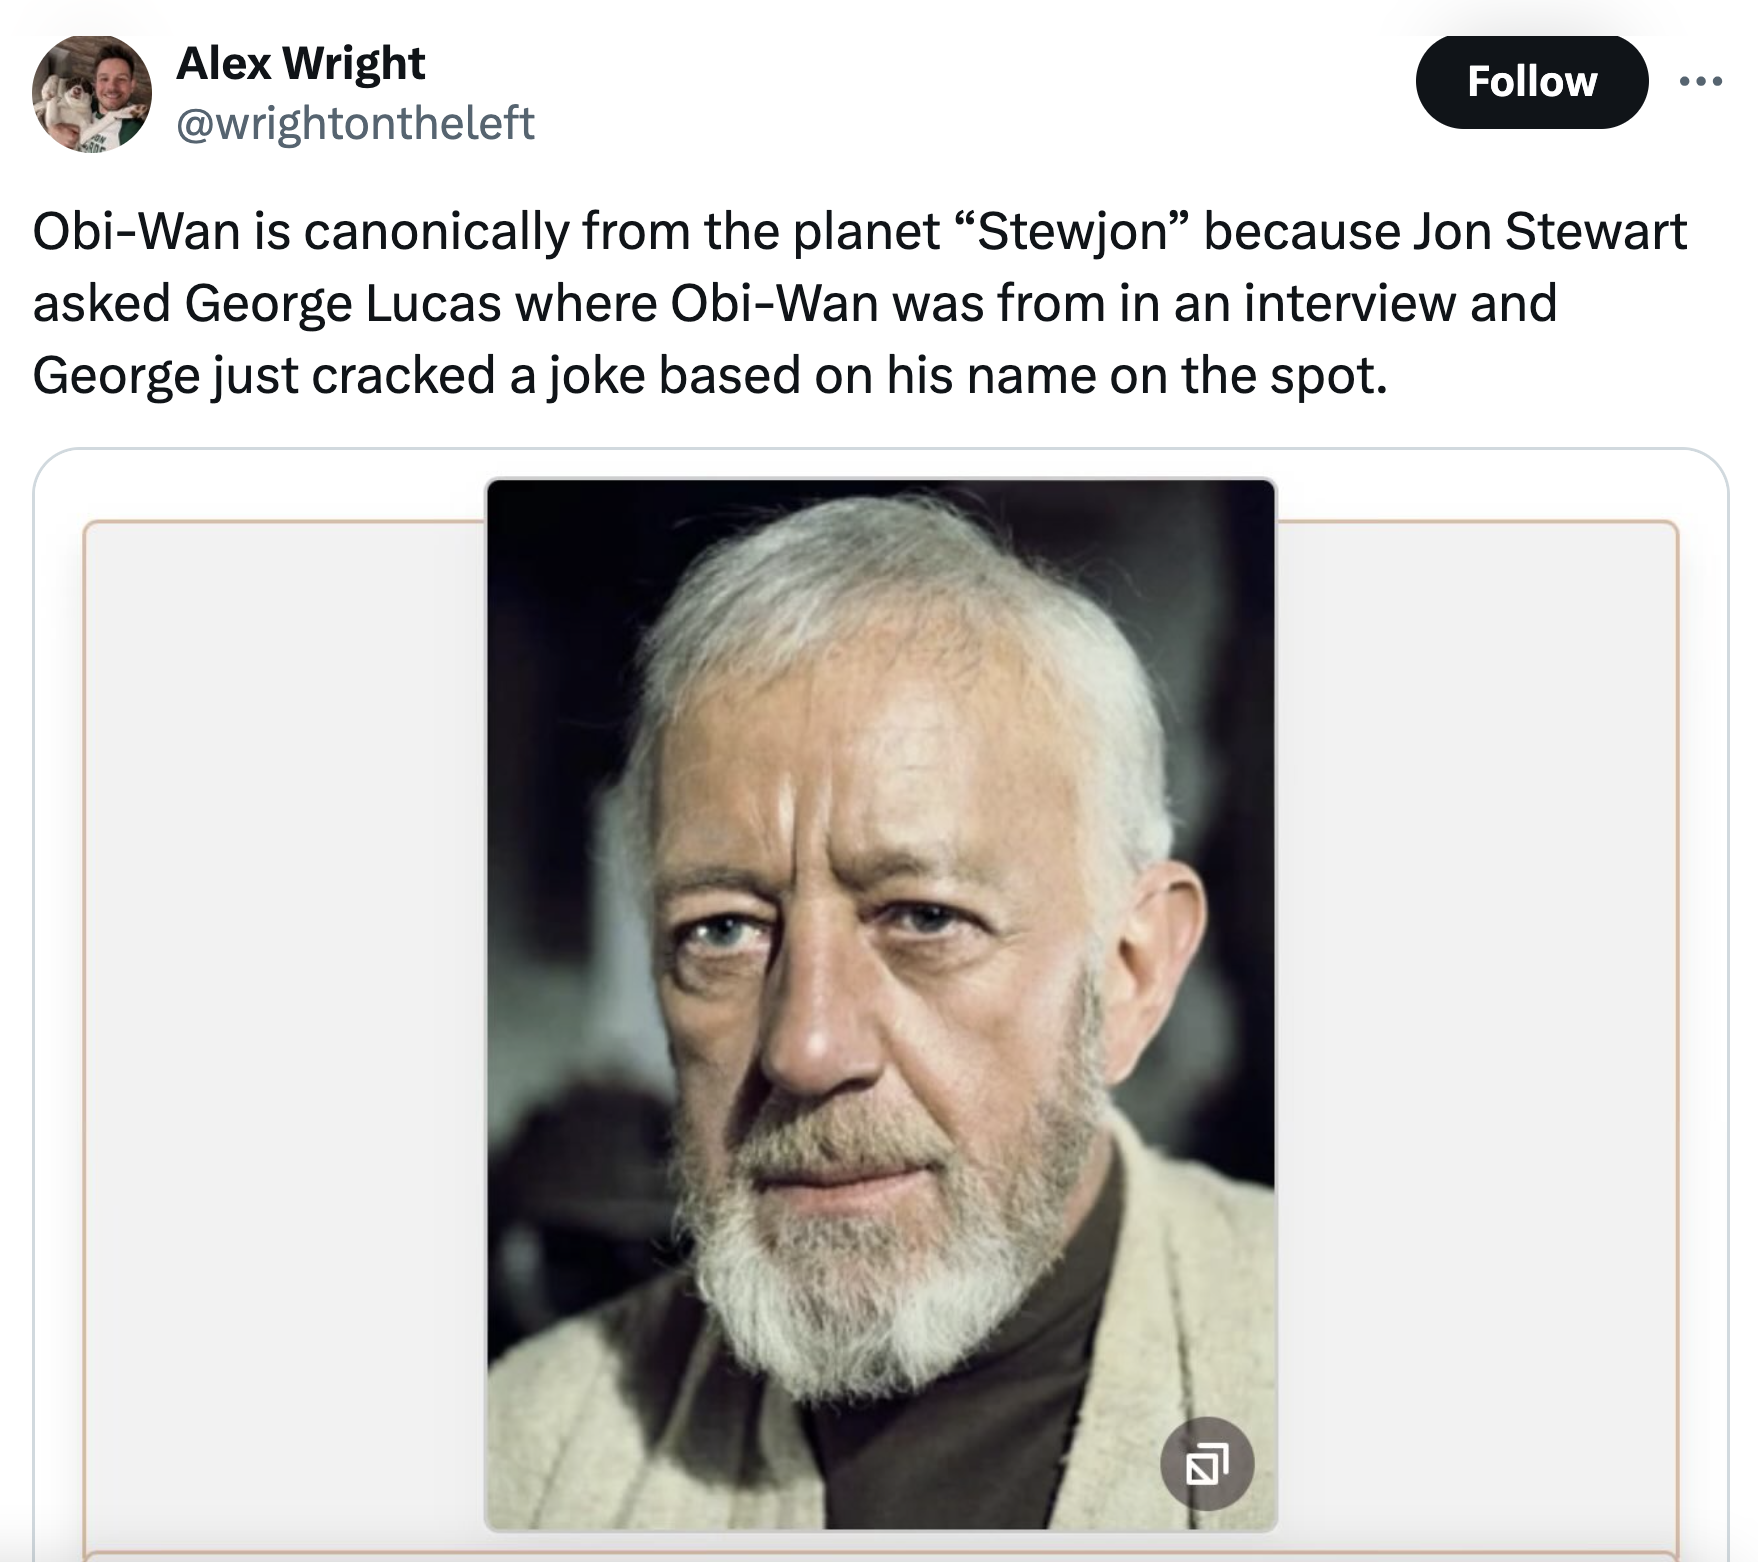 Alex Wright ObiWan is canonically from the planet "Stewjon" because Jon Stewart asked George Lucas where ObiWan was from in an interview and George just cracked a joke based on his name on the spot.